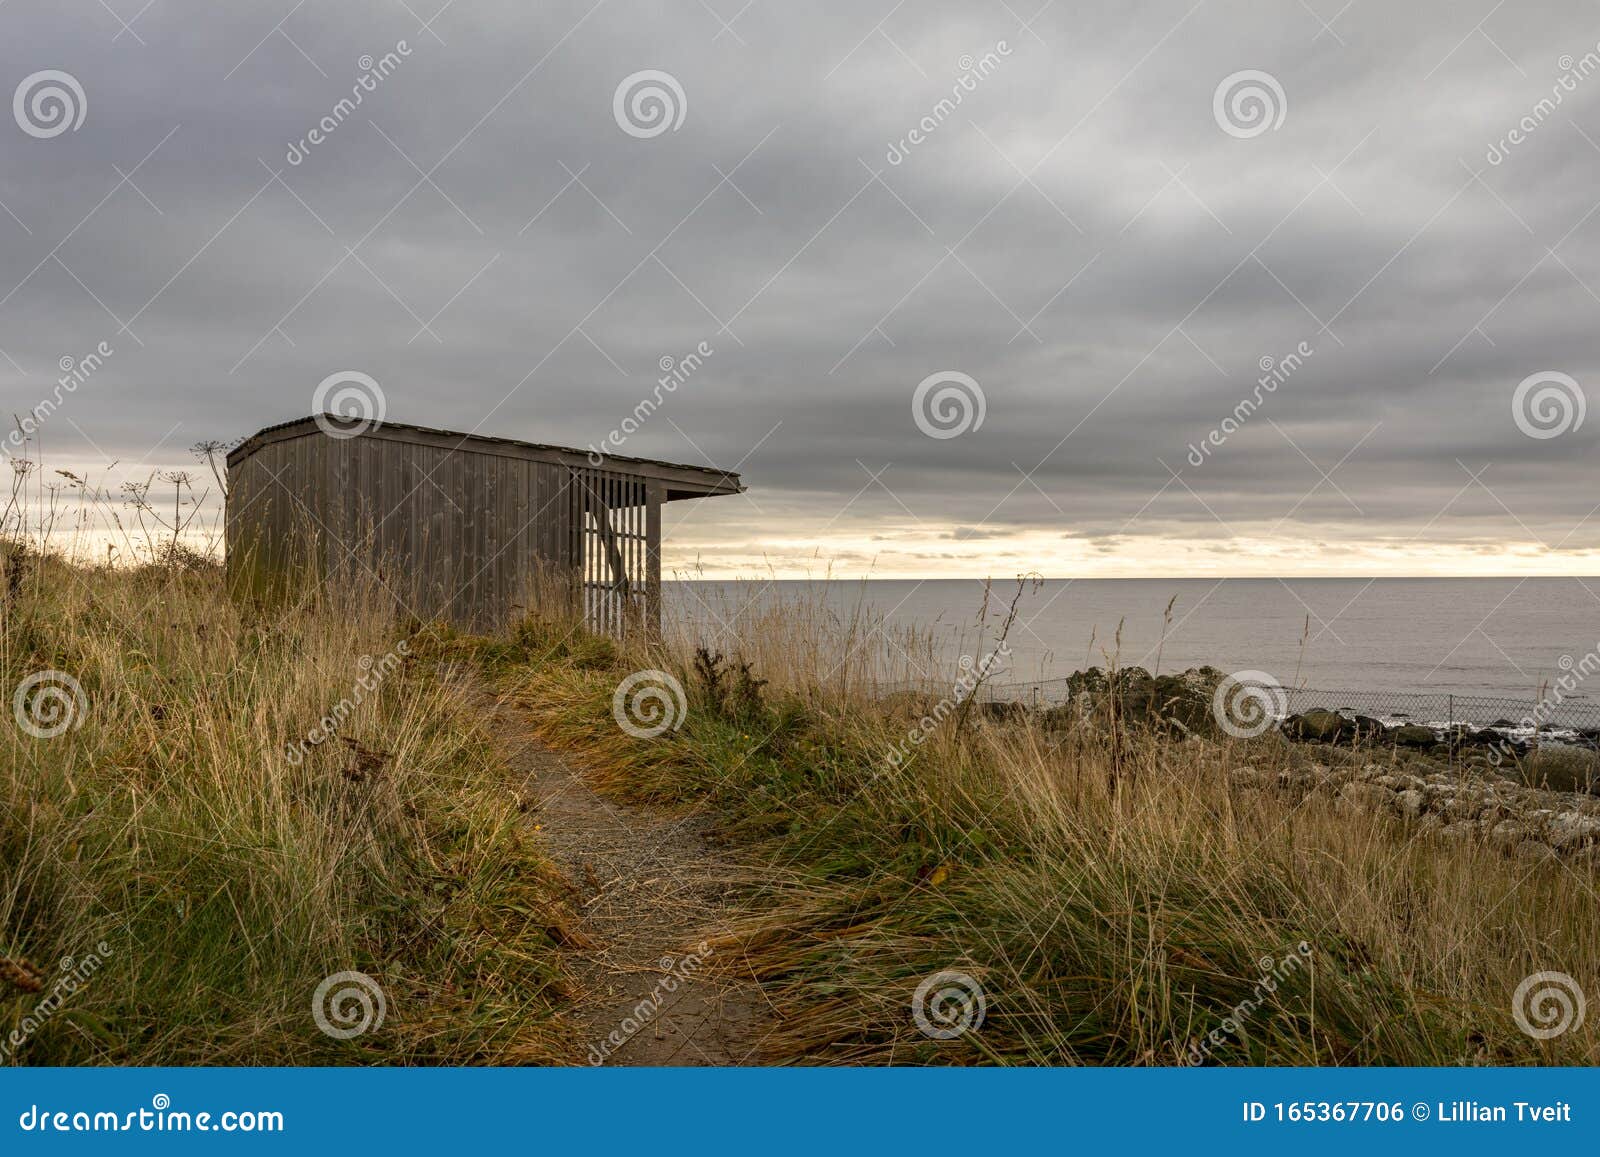 birdwatching cabin by the sea, at lista in norway